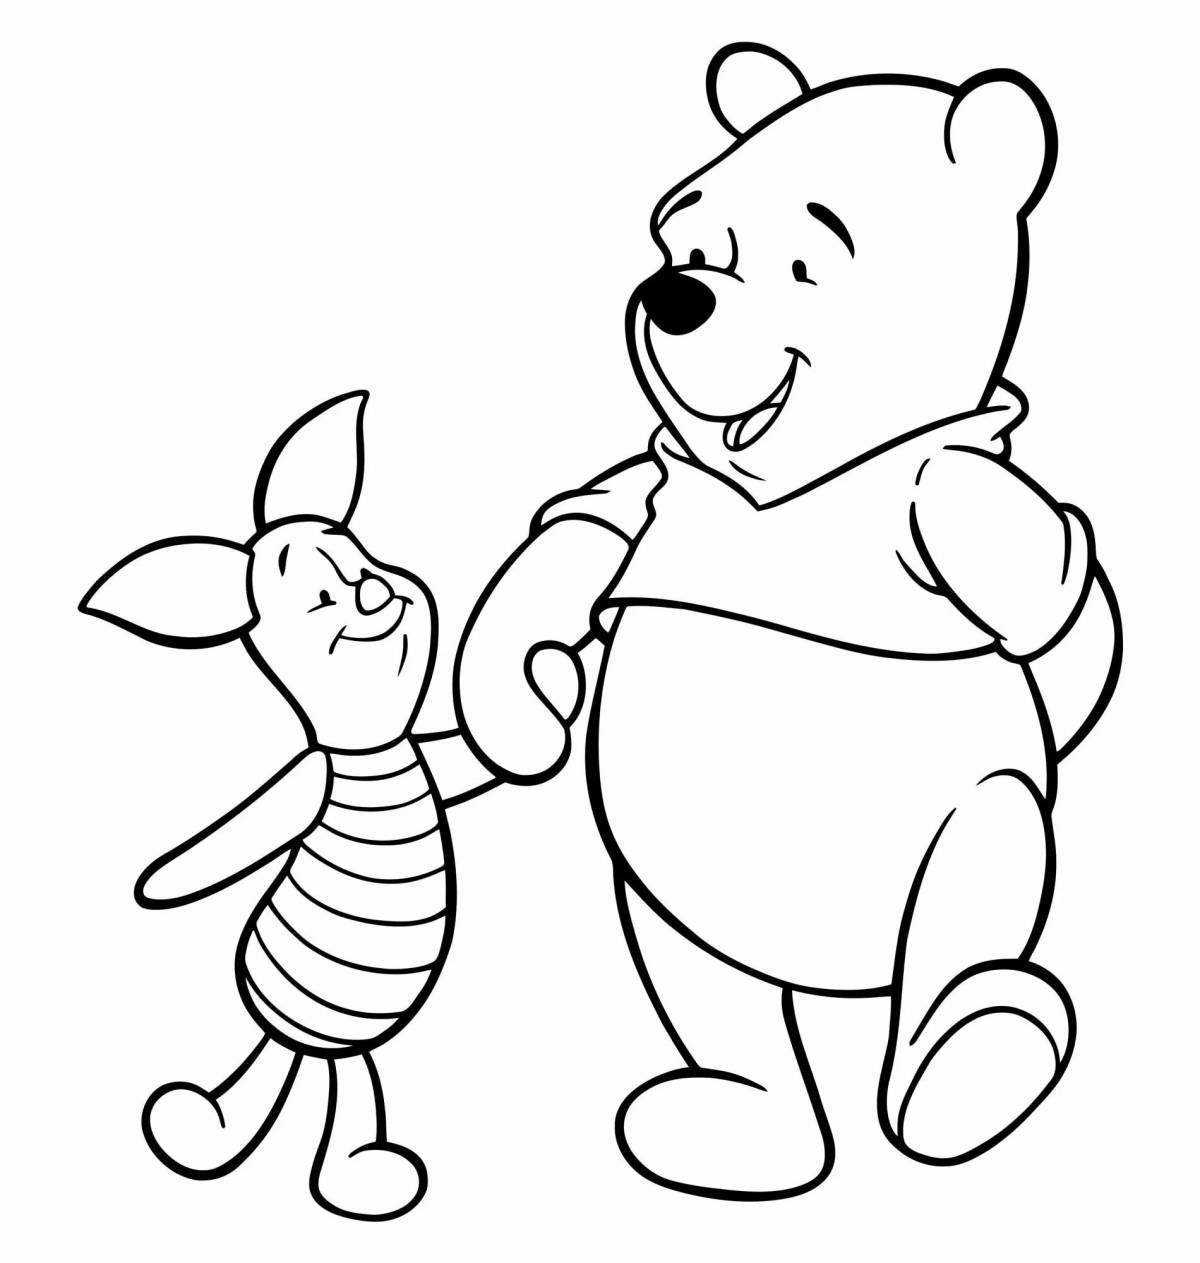 Fun cartoon characters coloring book for 4-5 year olds